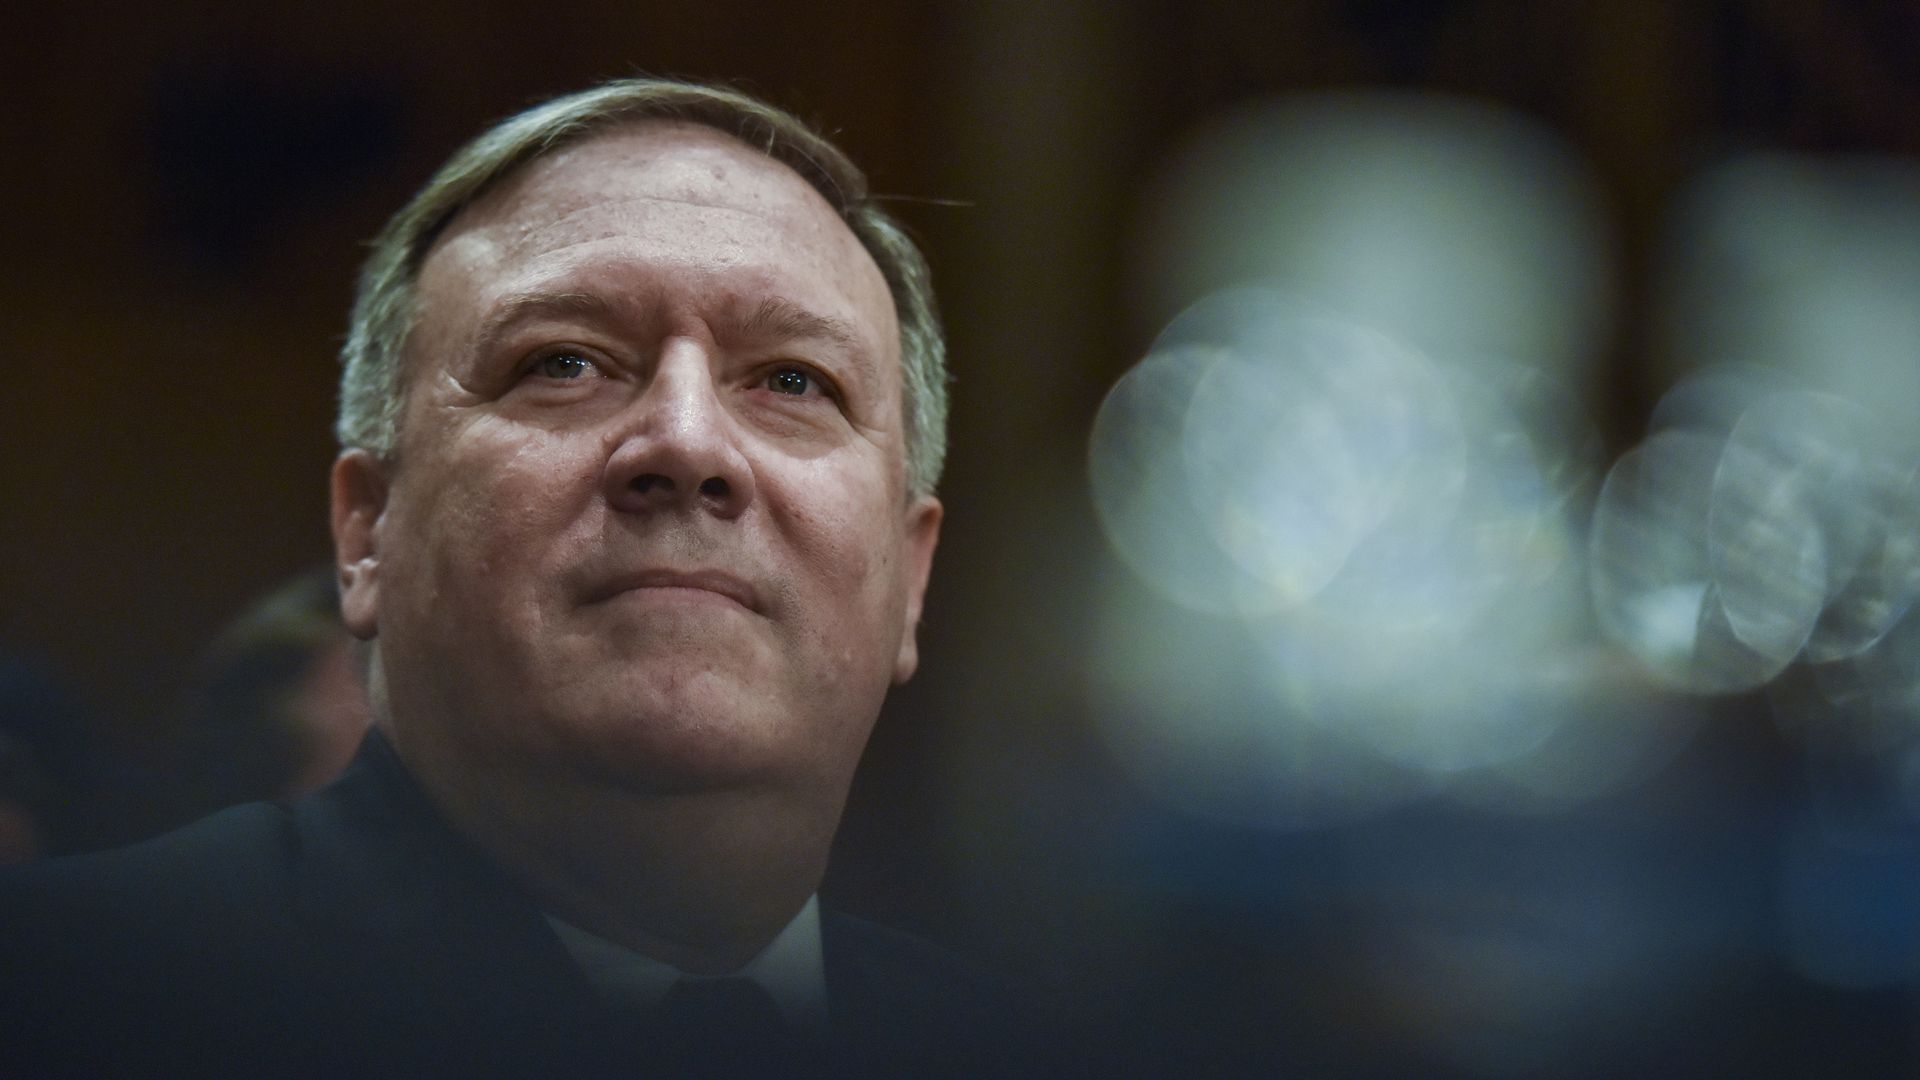 Mike Pompeo looks up hopefully during confirmation hearing